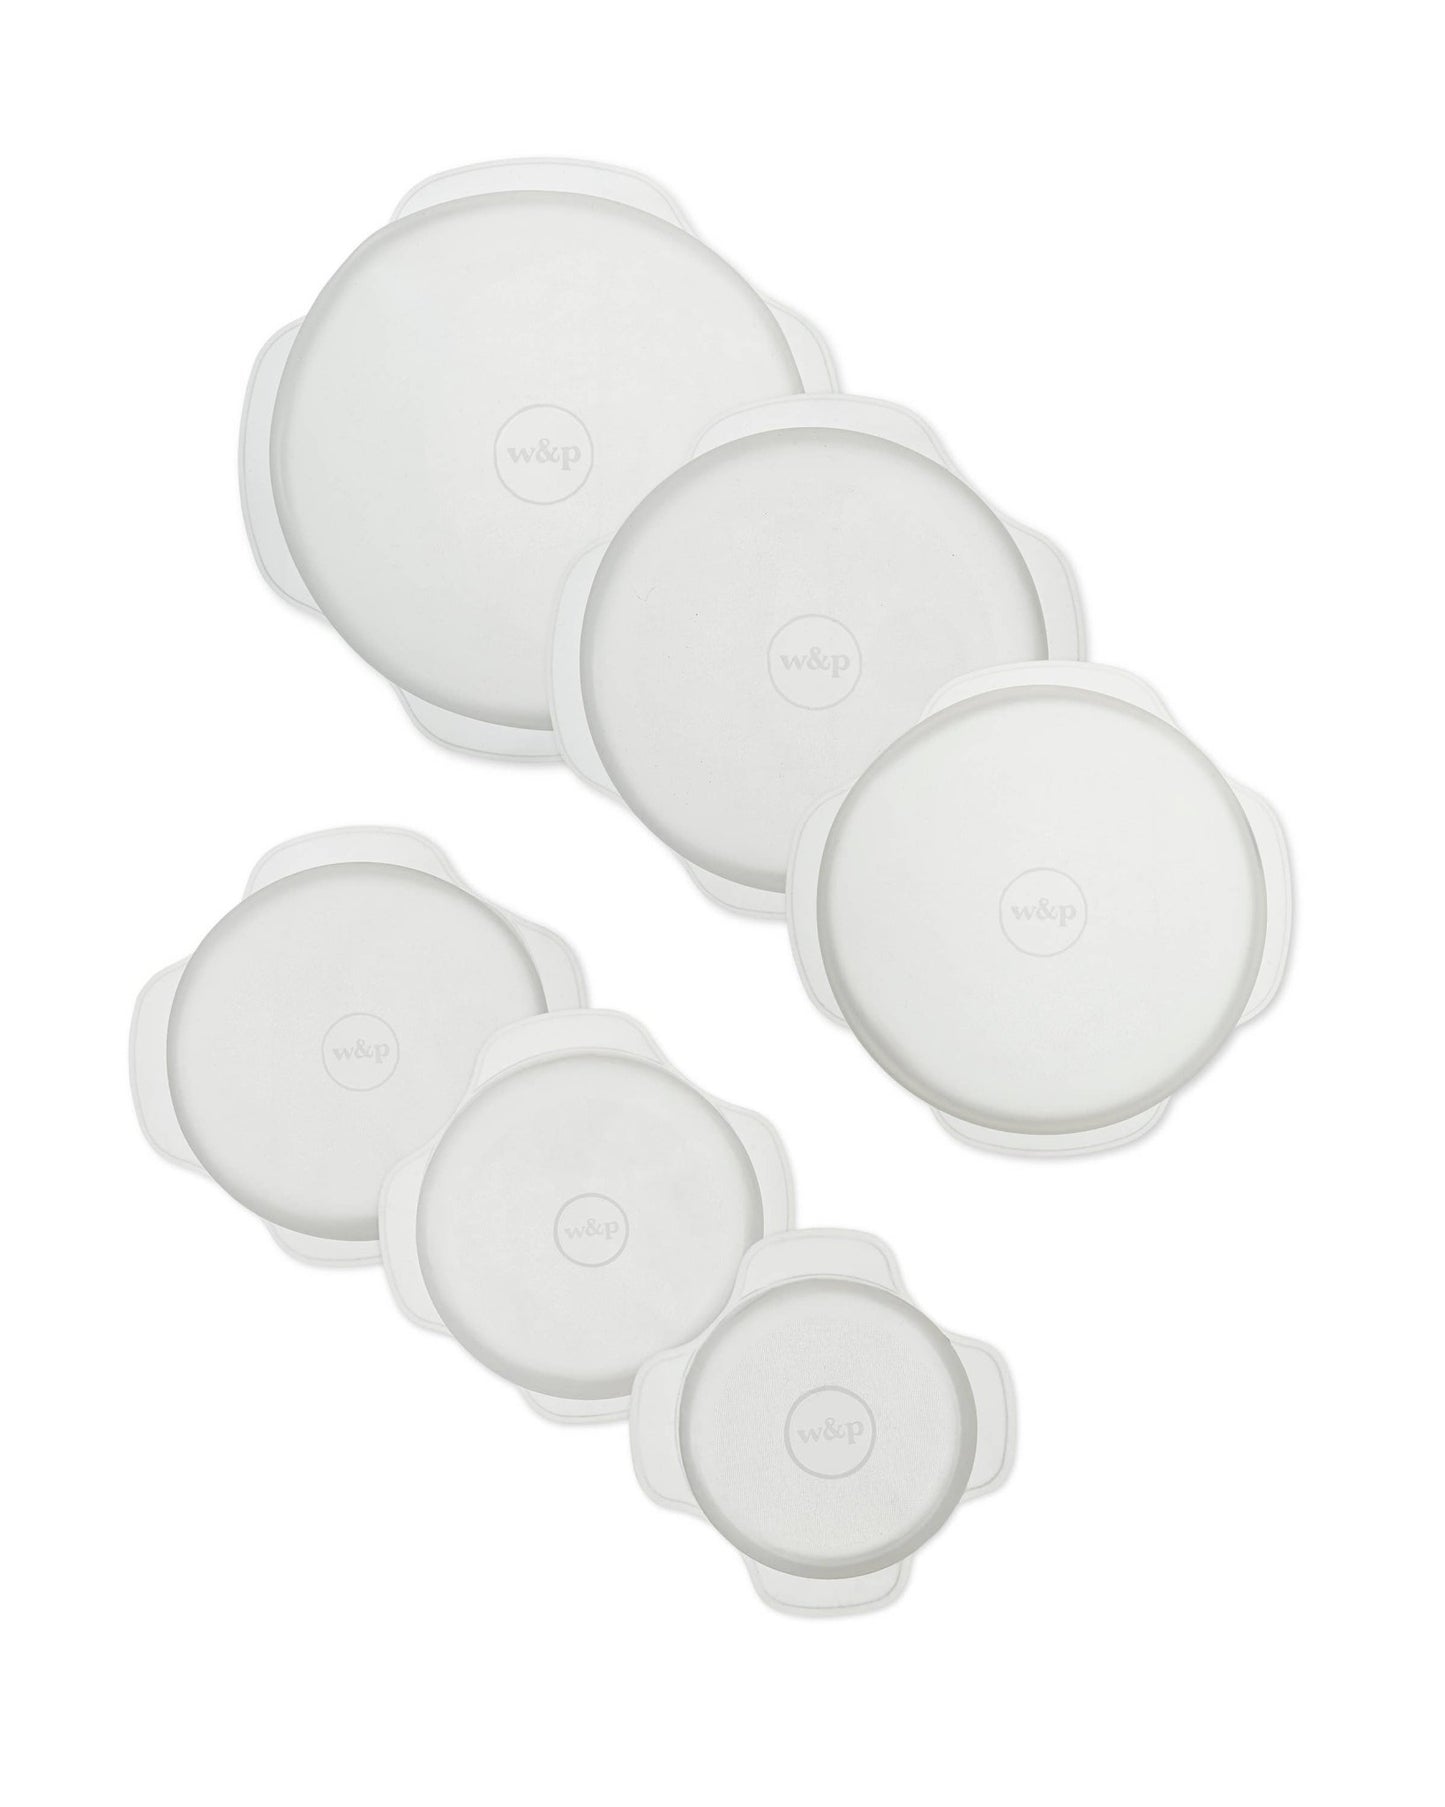 Reusable Silicone Stretch Lids Set of 6 Assorted Sizes - Top view - Echo Market